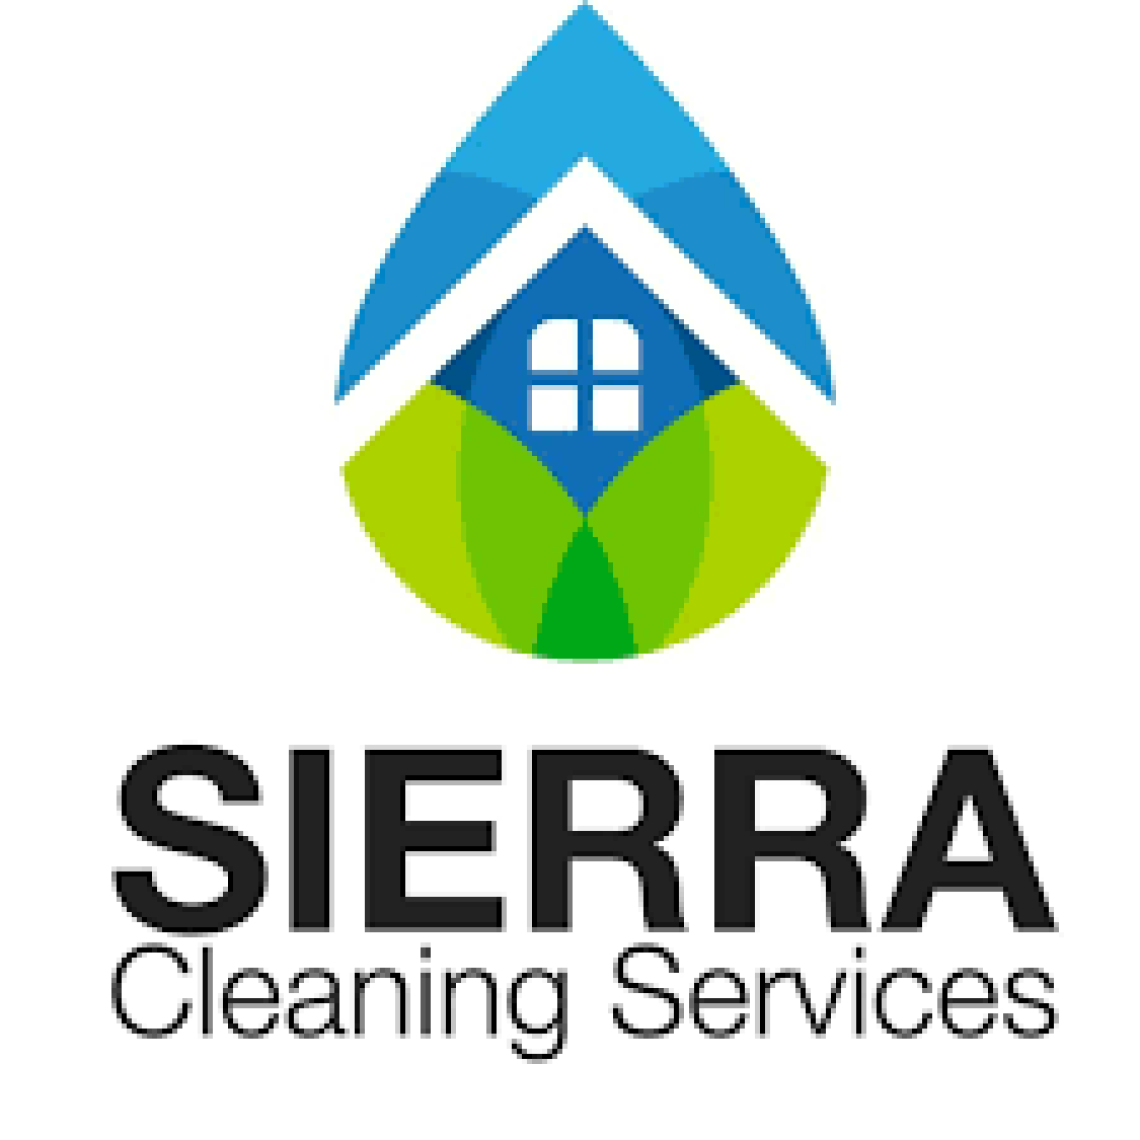 (Cleaning Services) Alfredo Sierra